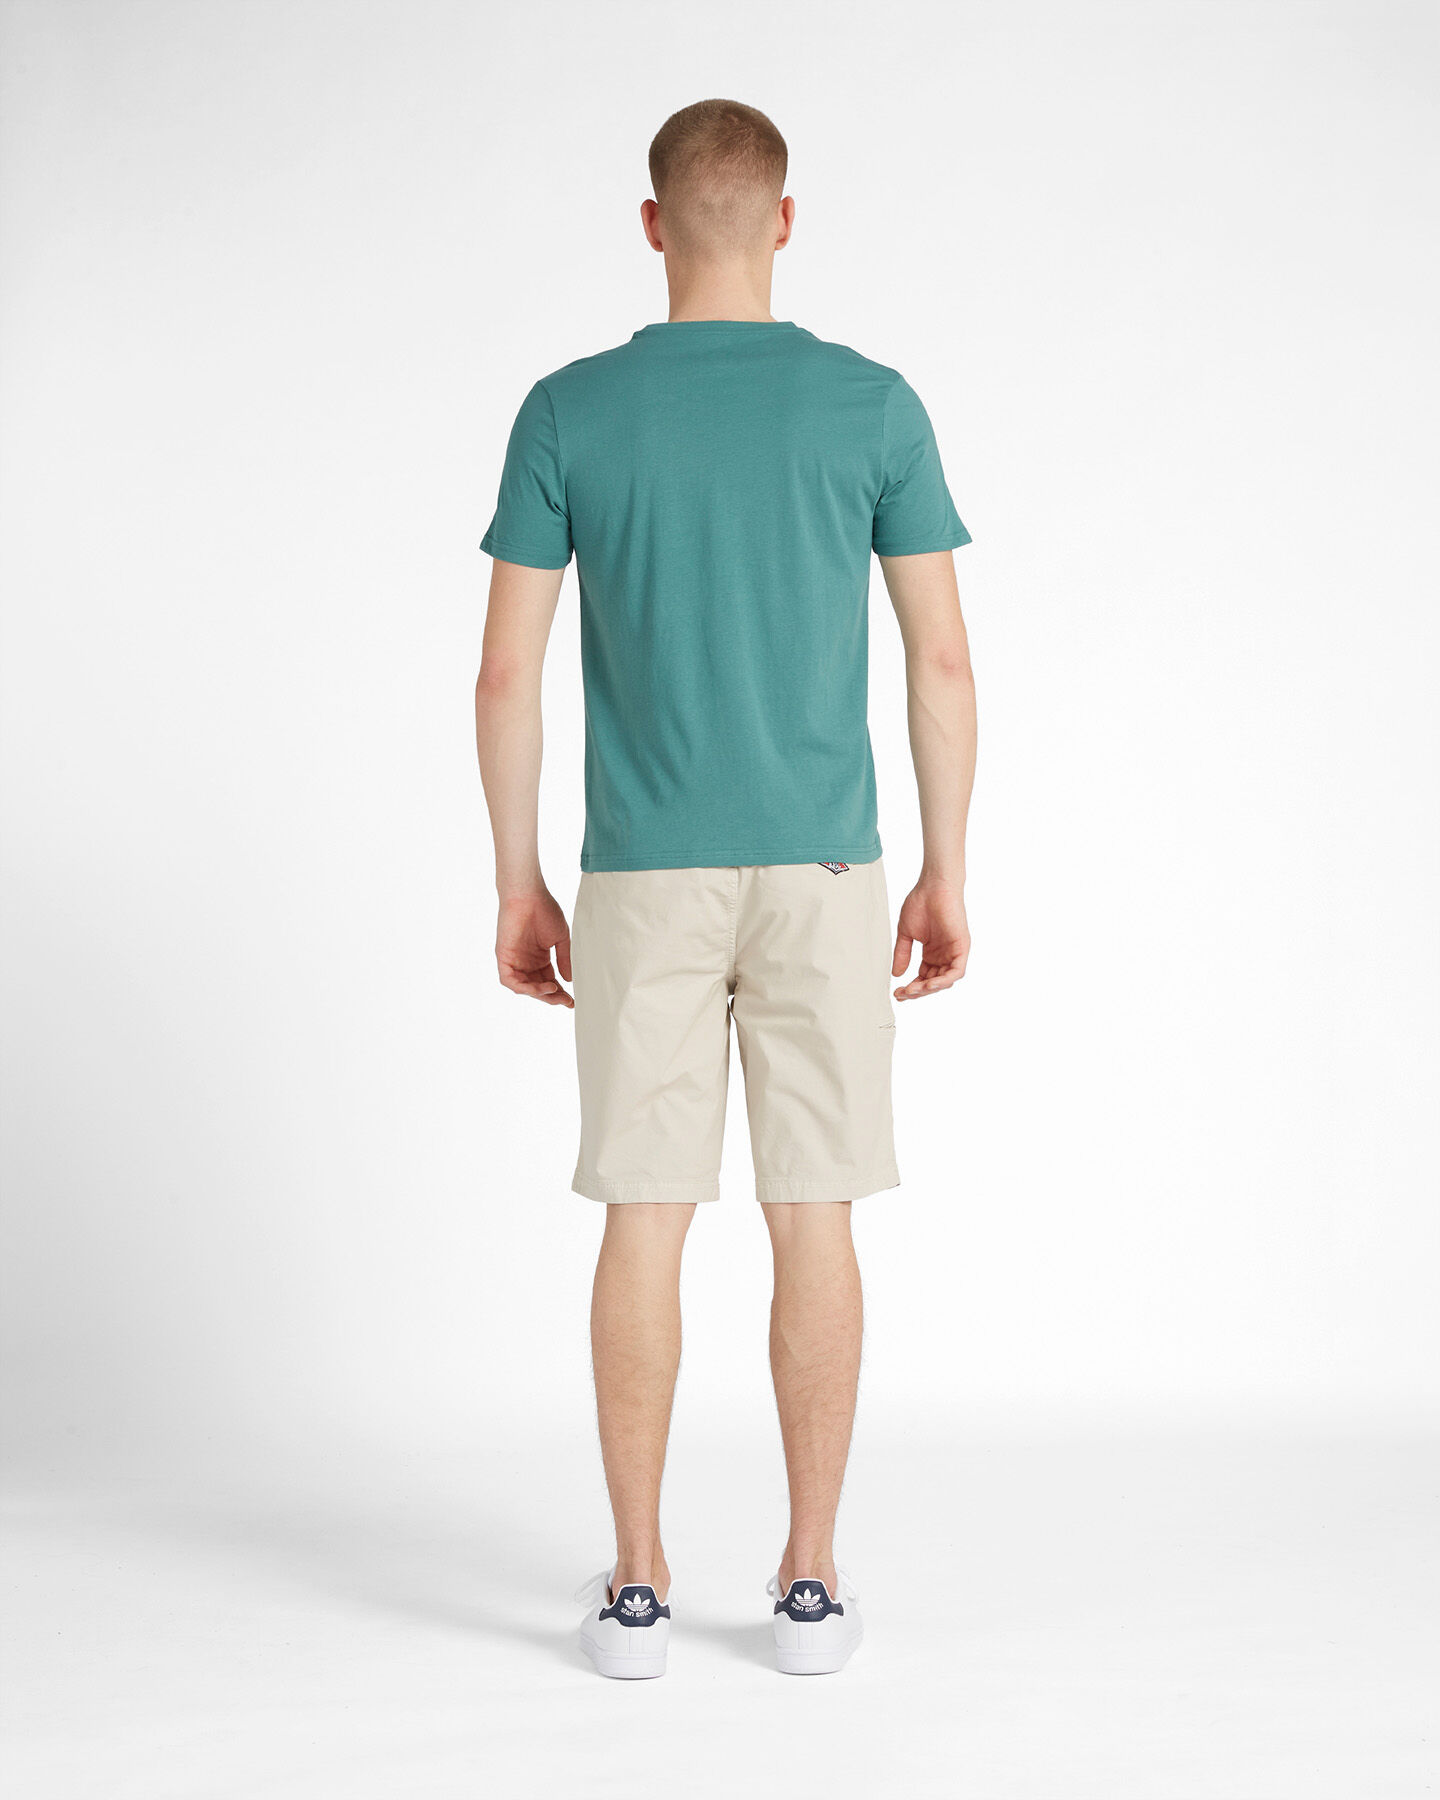  T-Shirt DACK'S BASIC COLLECTION M S4118346|774|S scatto 2